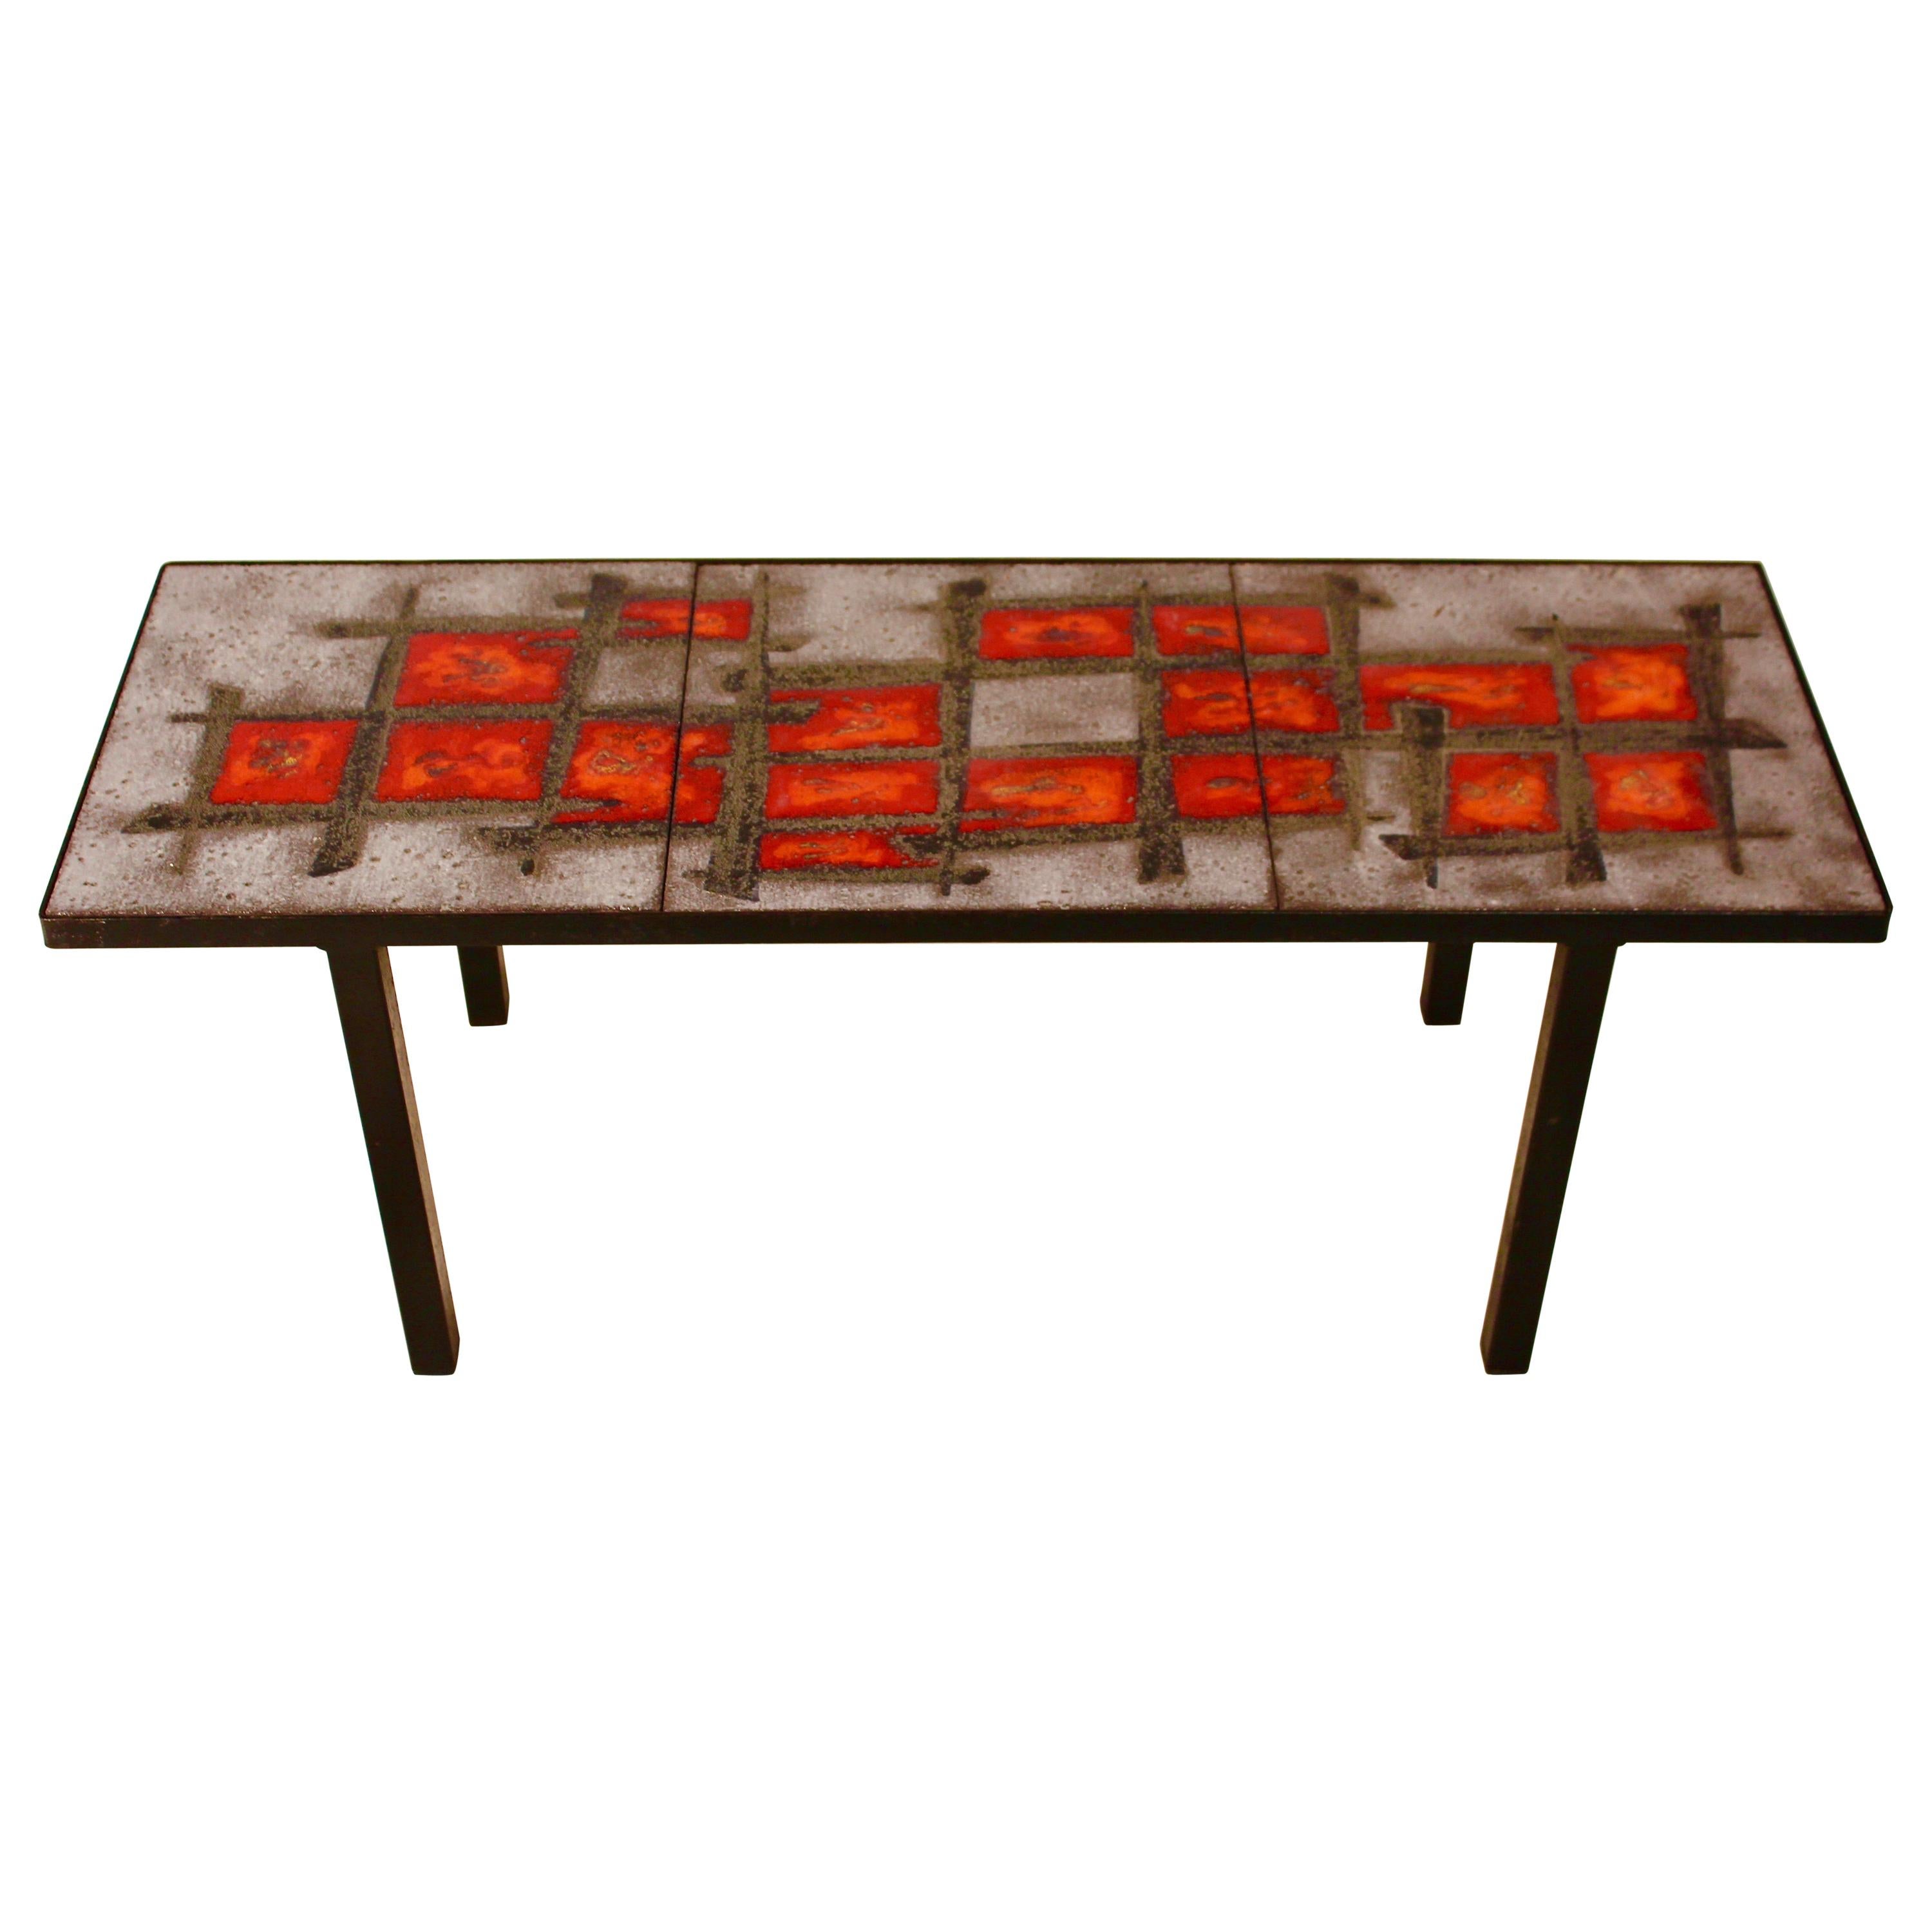 Robert Et Jean Cloutier Ceramic Coffee Table in Enameled Lava Stone, 1960